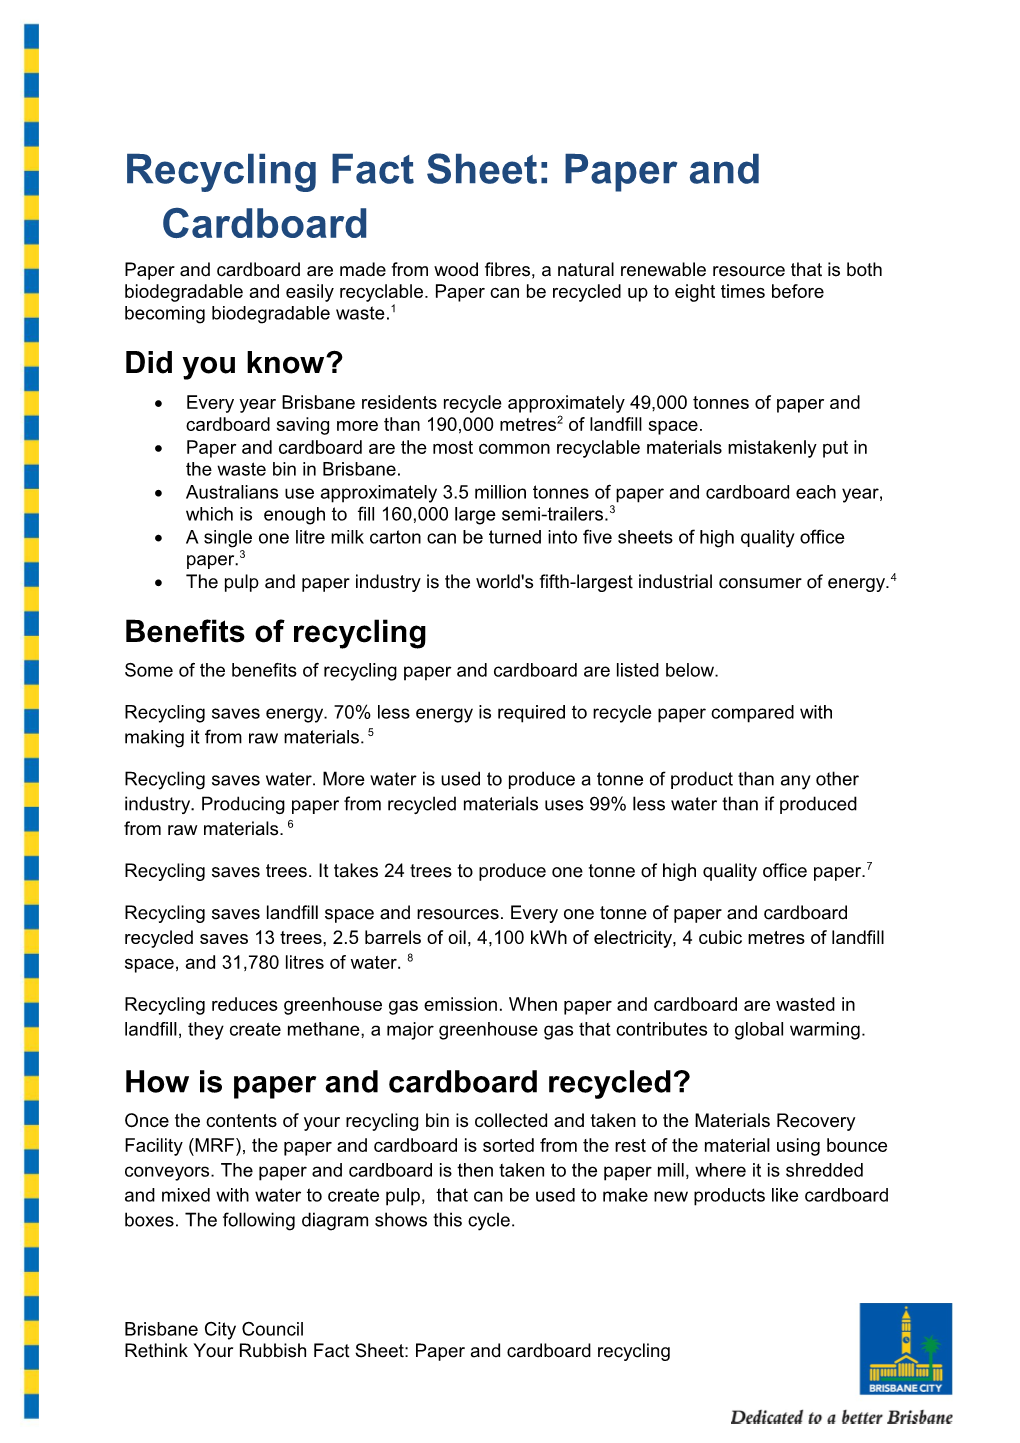 Recycling Fact Sheet: Paper and Cardboard